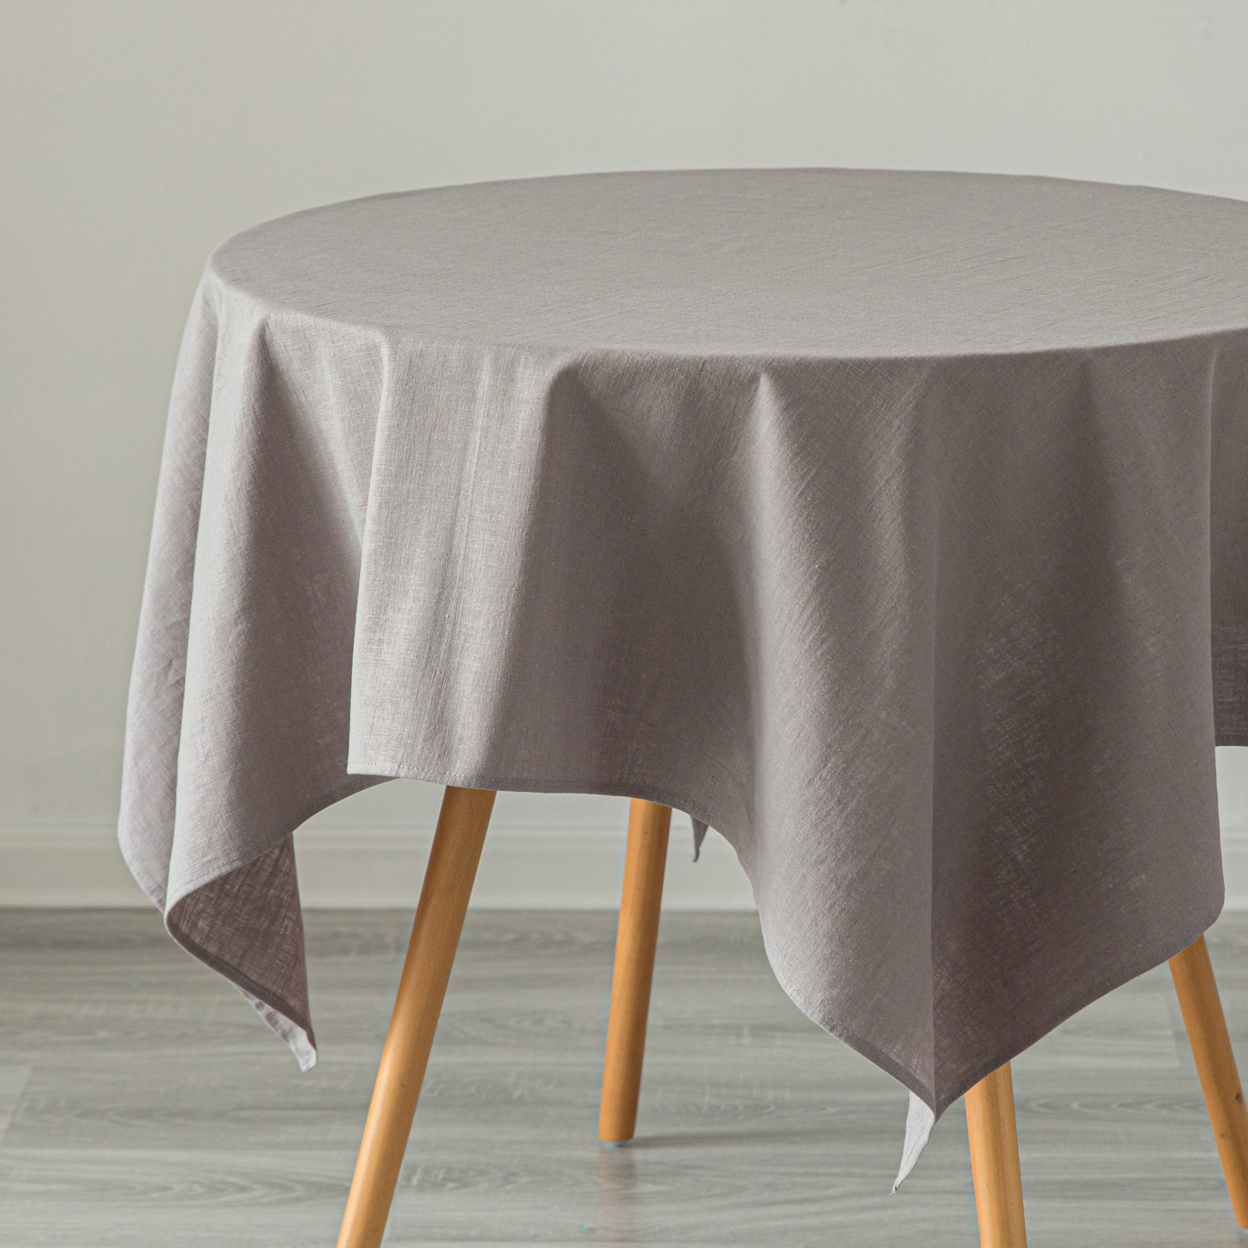 Deerlux 100 Percent Pure Linen Washable Tablecloth Solid Color - 52 X 78 In. Pink